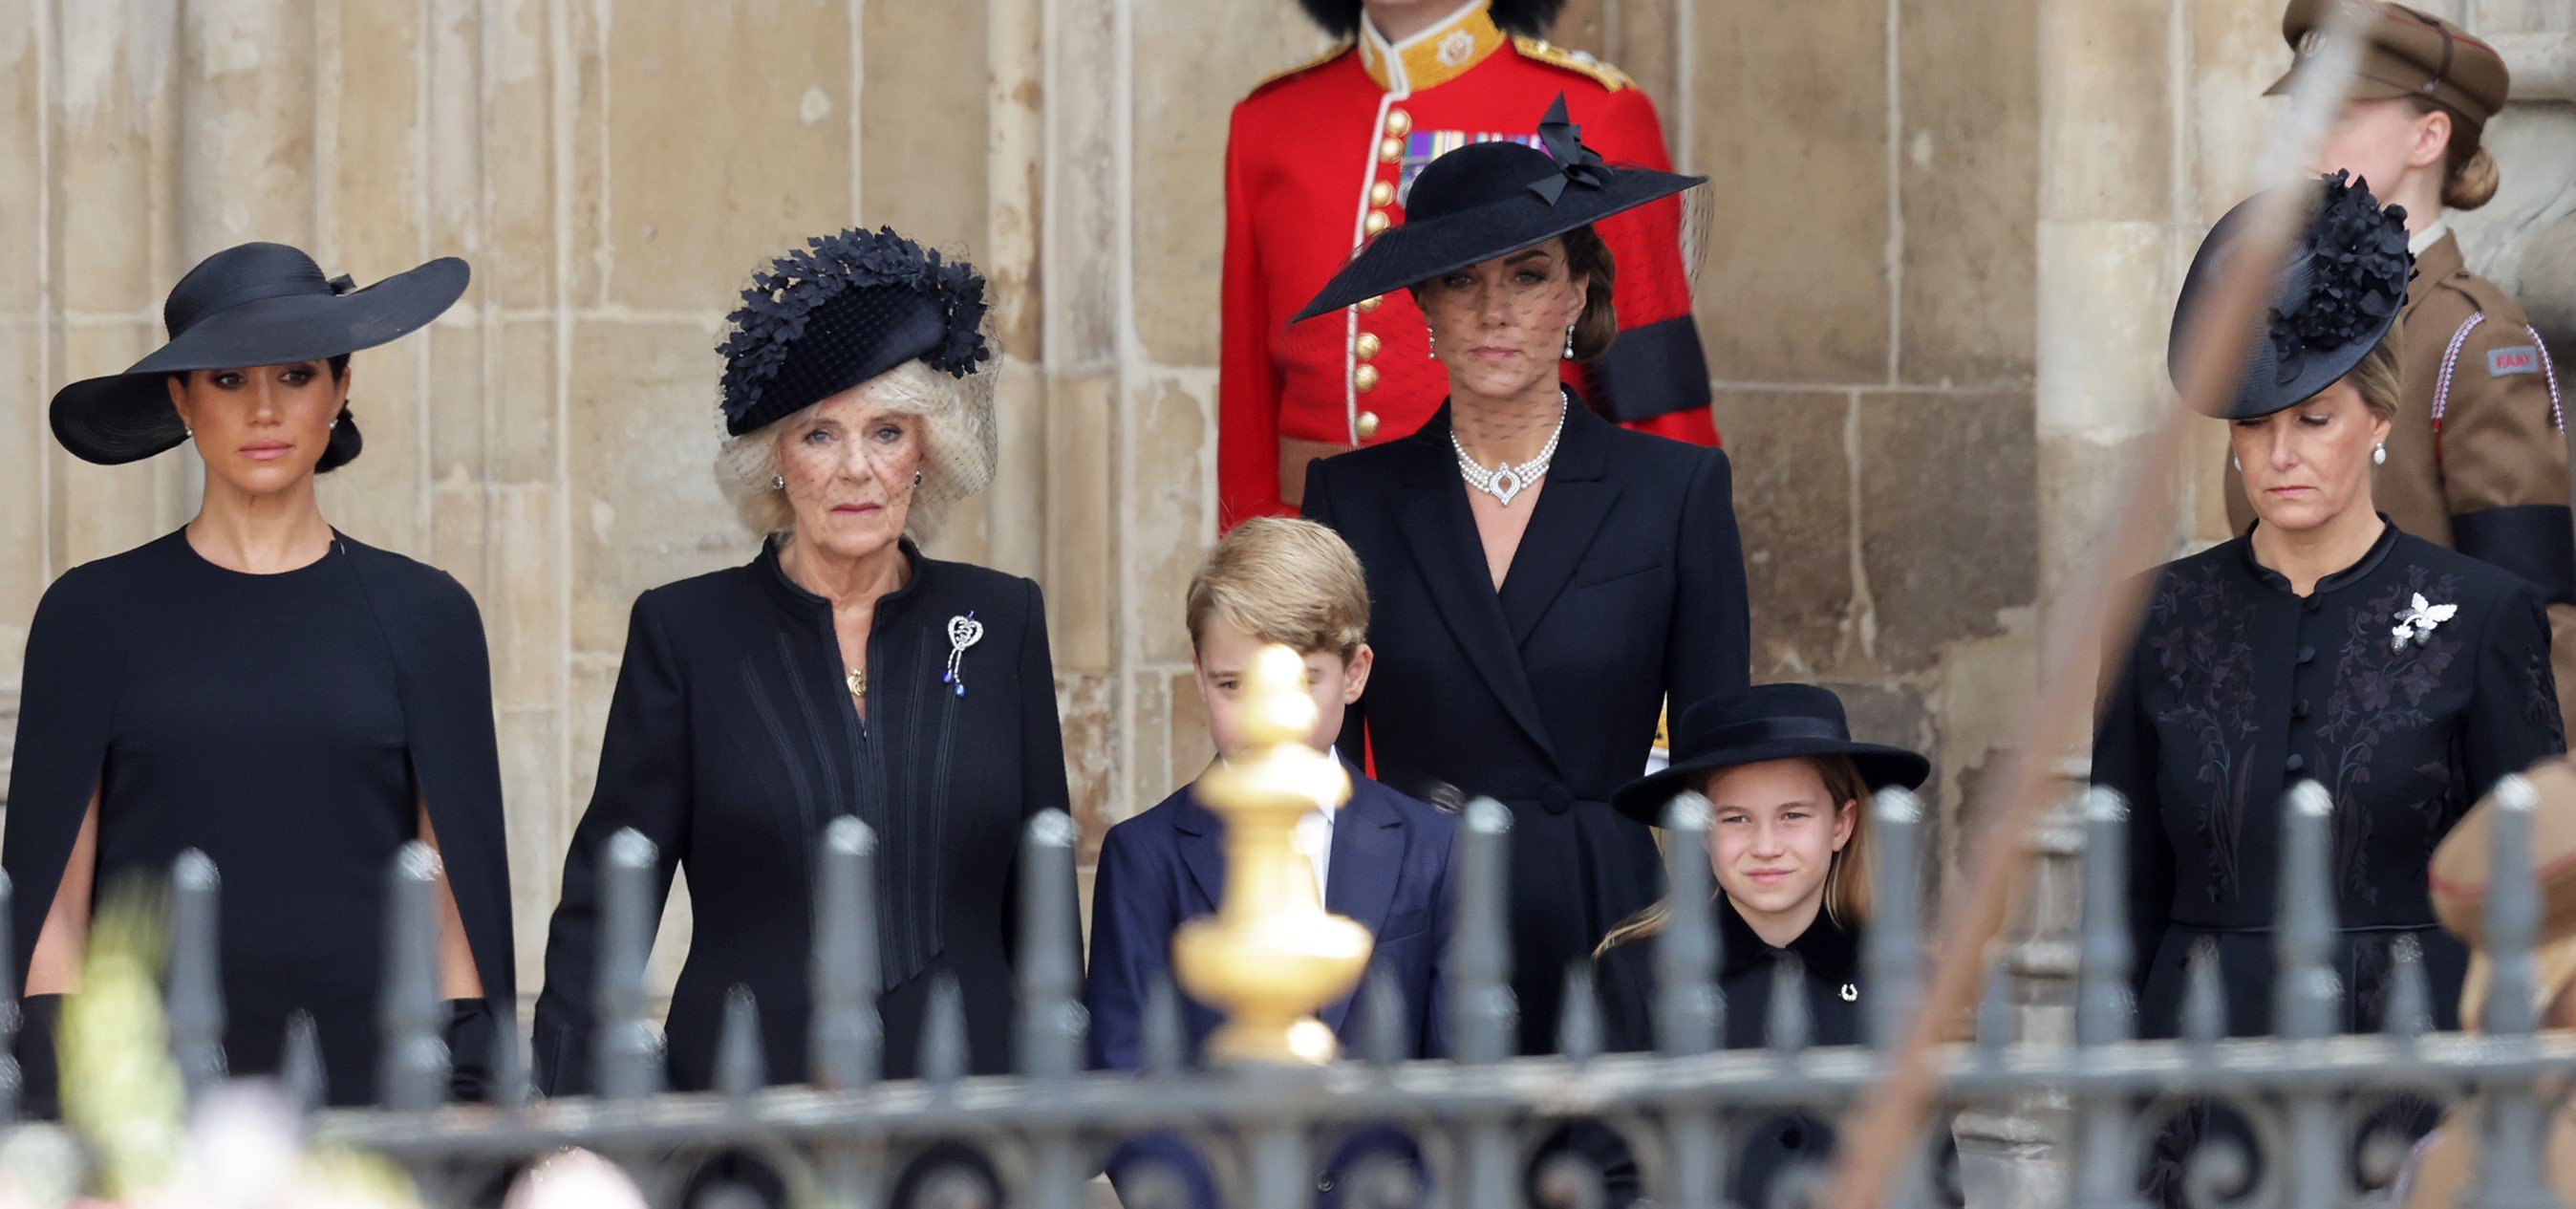 Expert Reveals Tensions Were High Between Meghan Markle and Other Royals Sophie, Kate, and Camilla Away From the Cameras After Queen’s Death